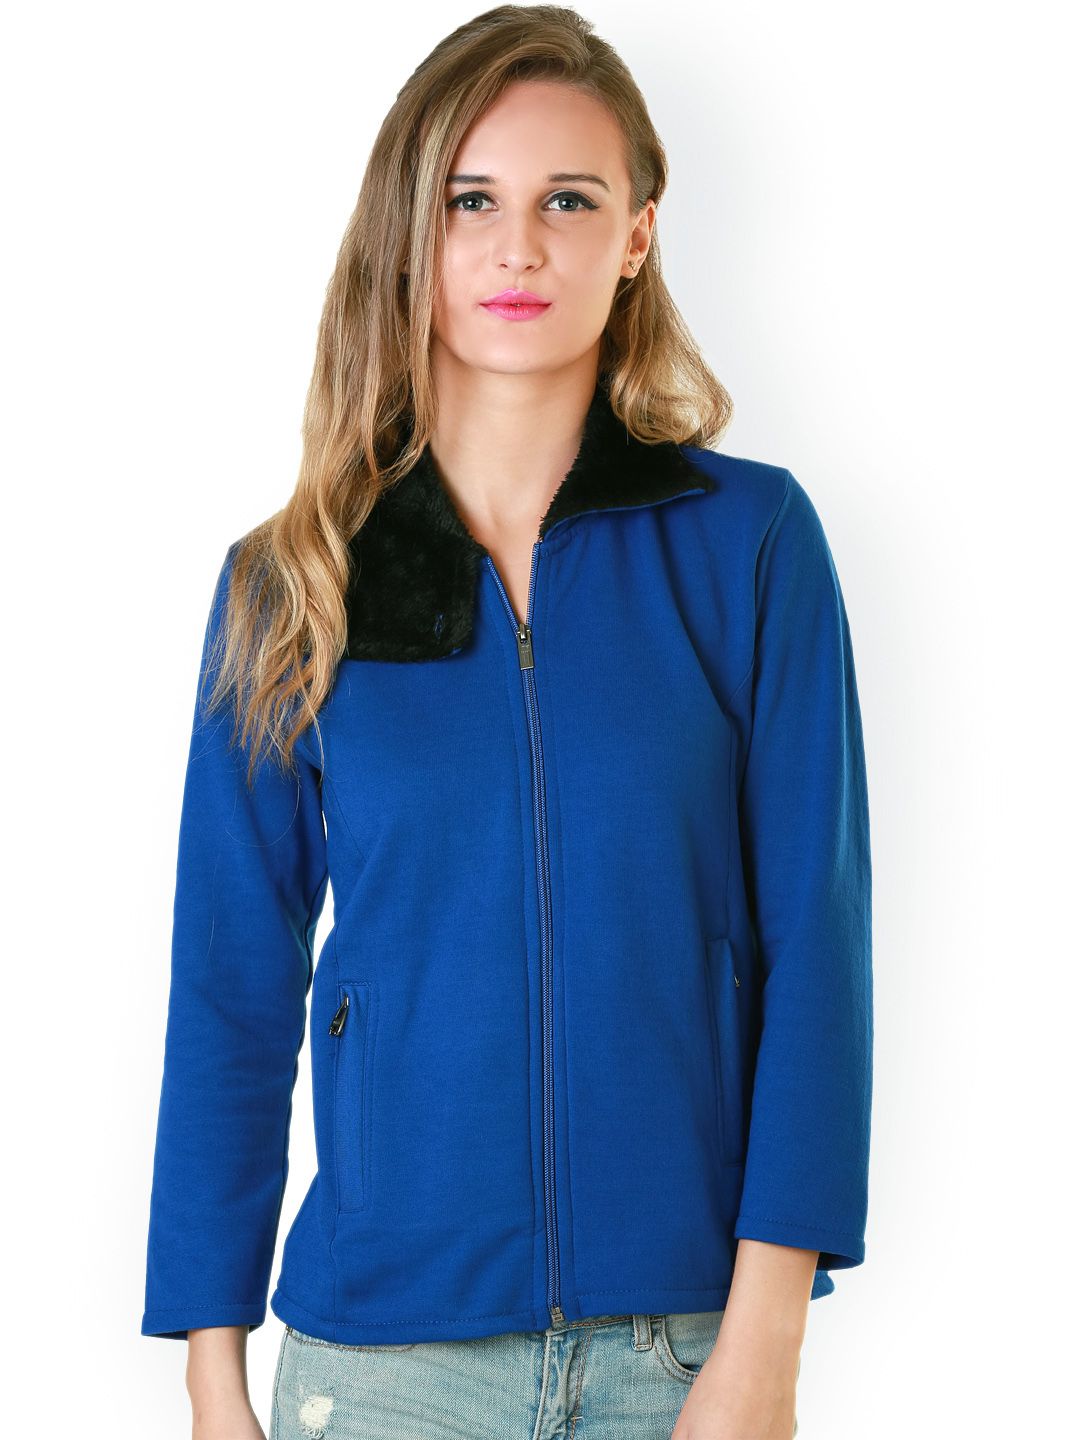 Belle Fille Blue Jacket Price in India